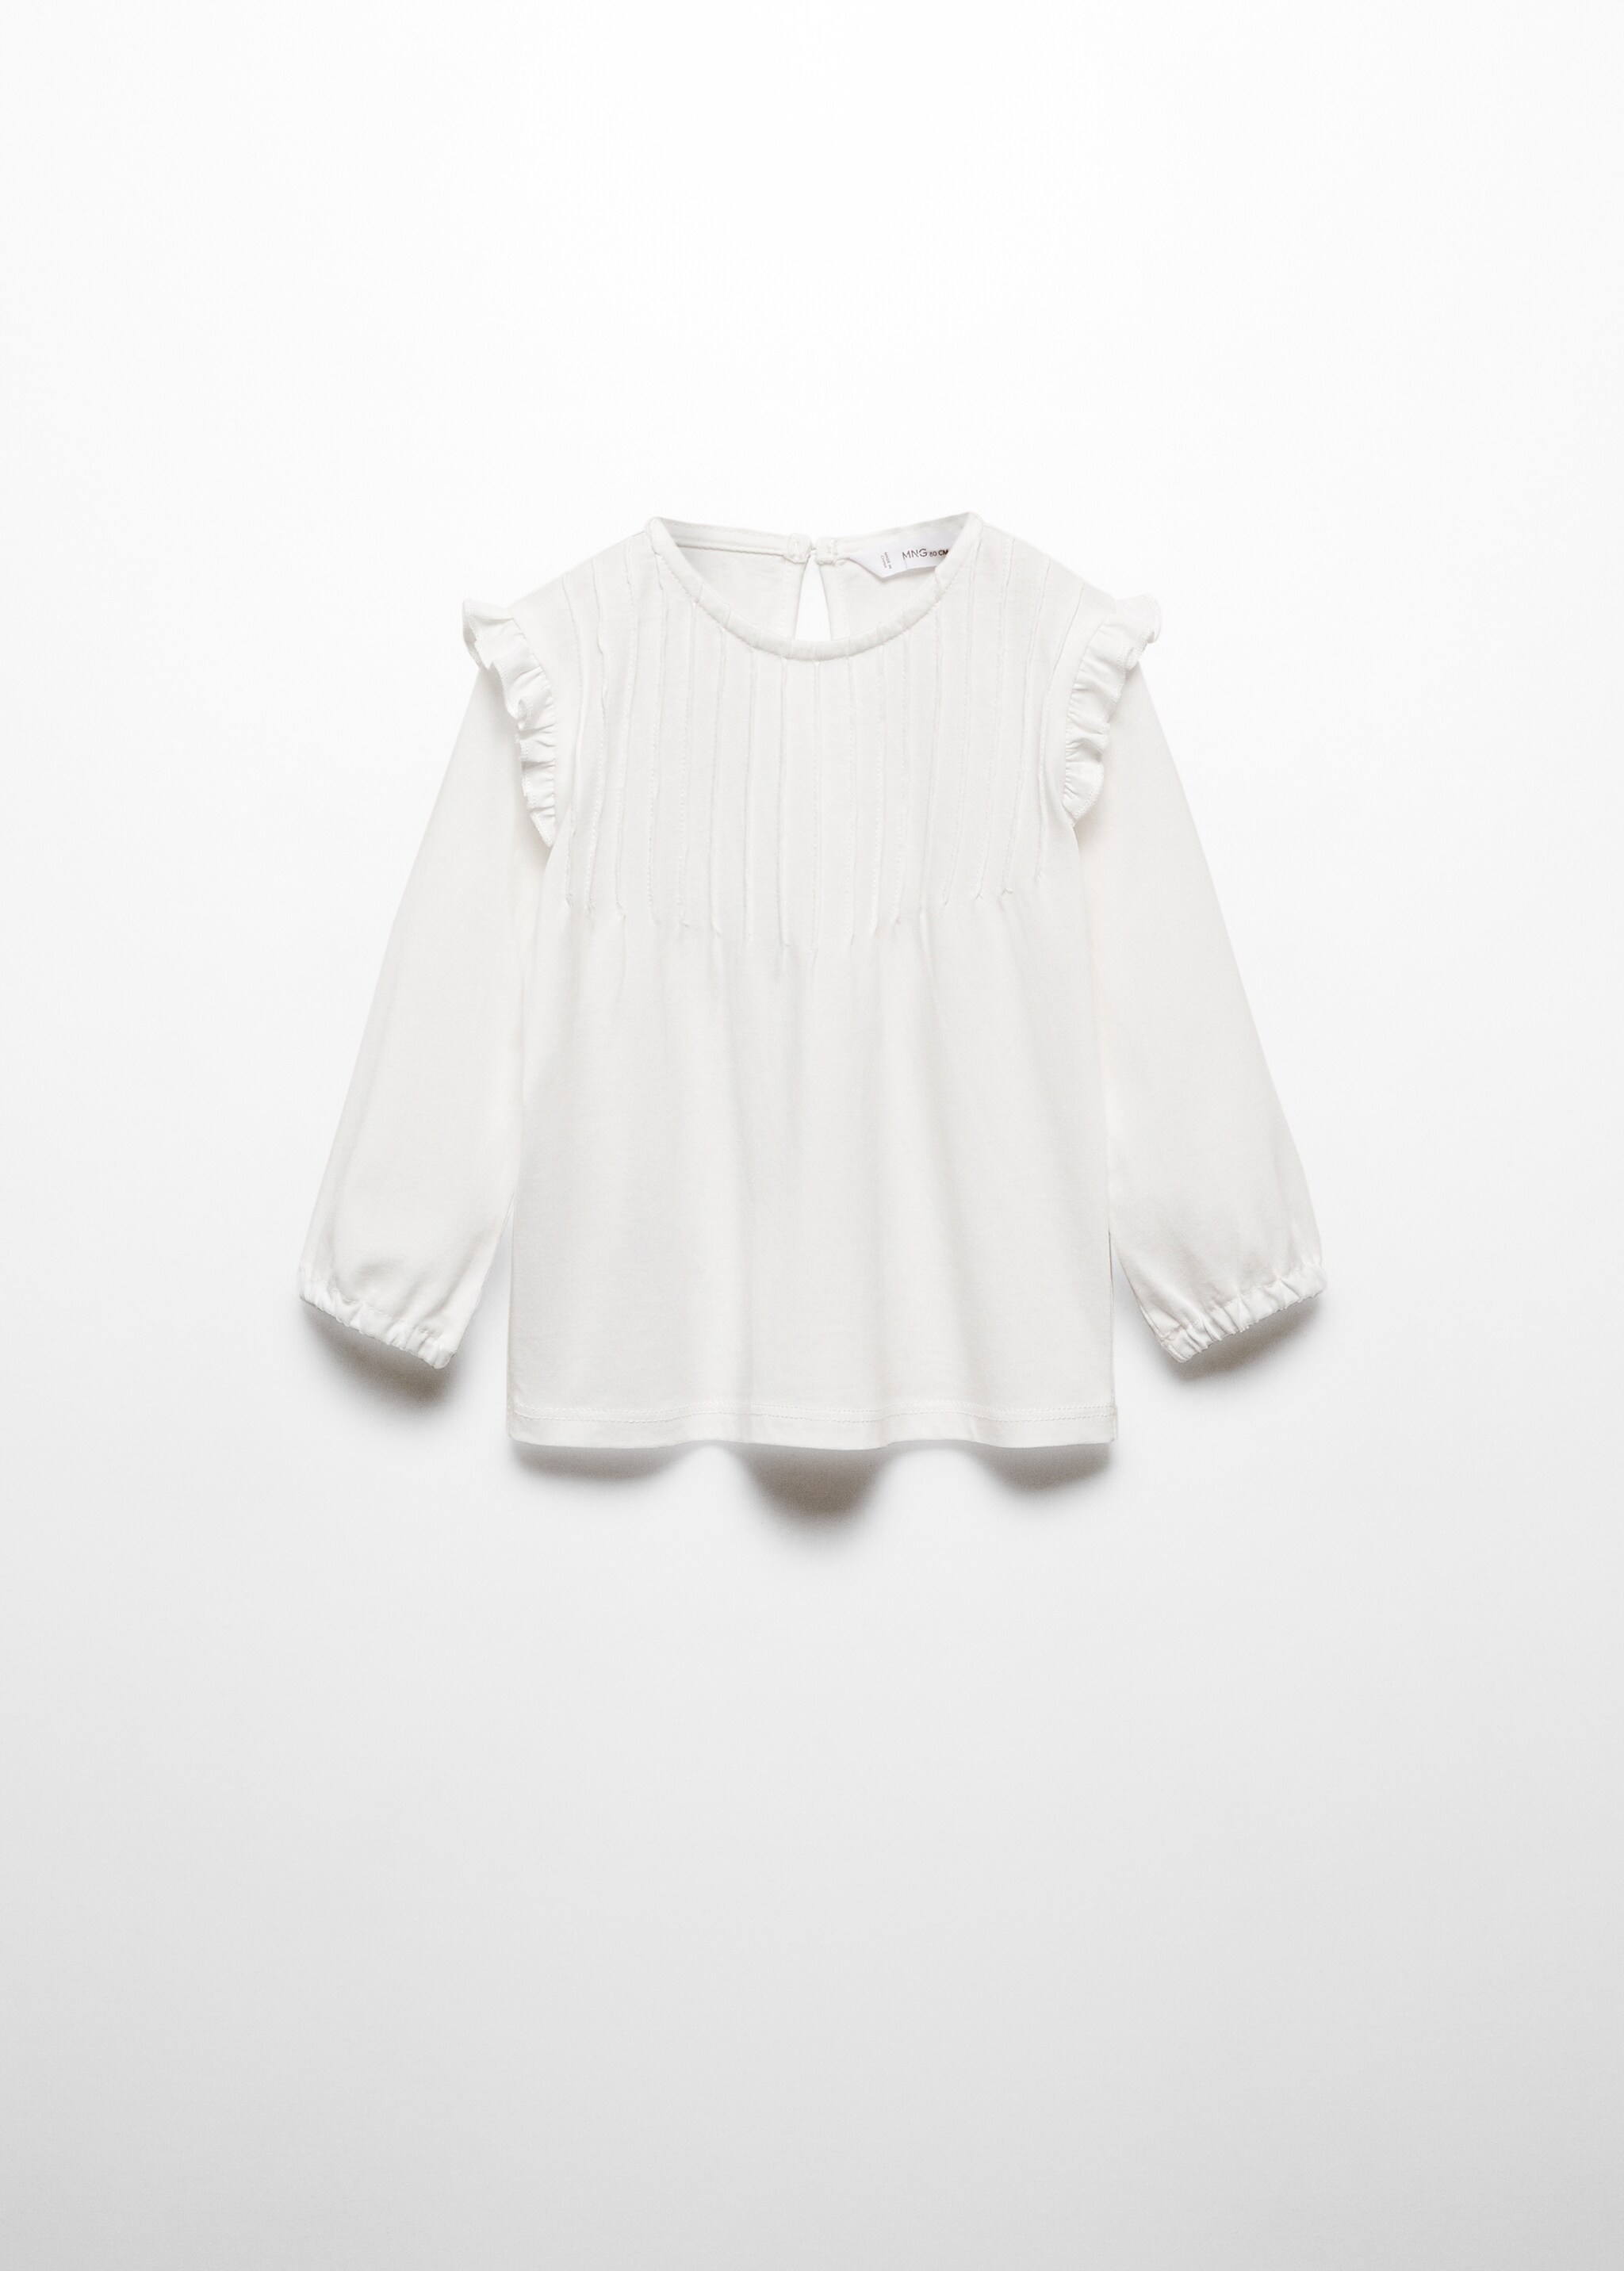 Long -sleeved t-shirt with ruffles - Article without model